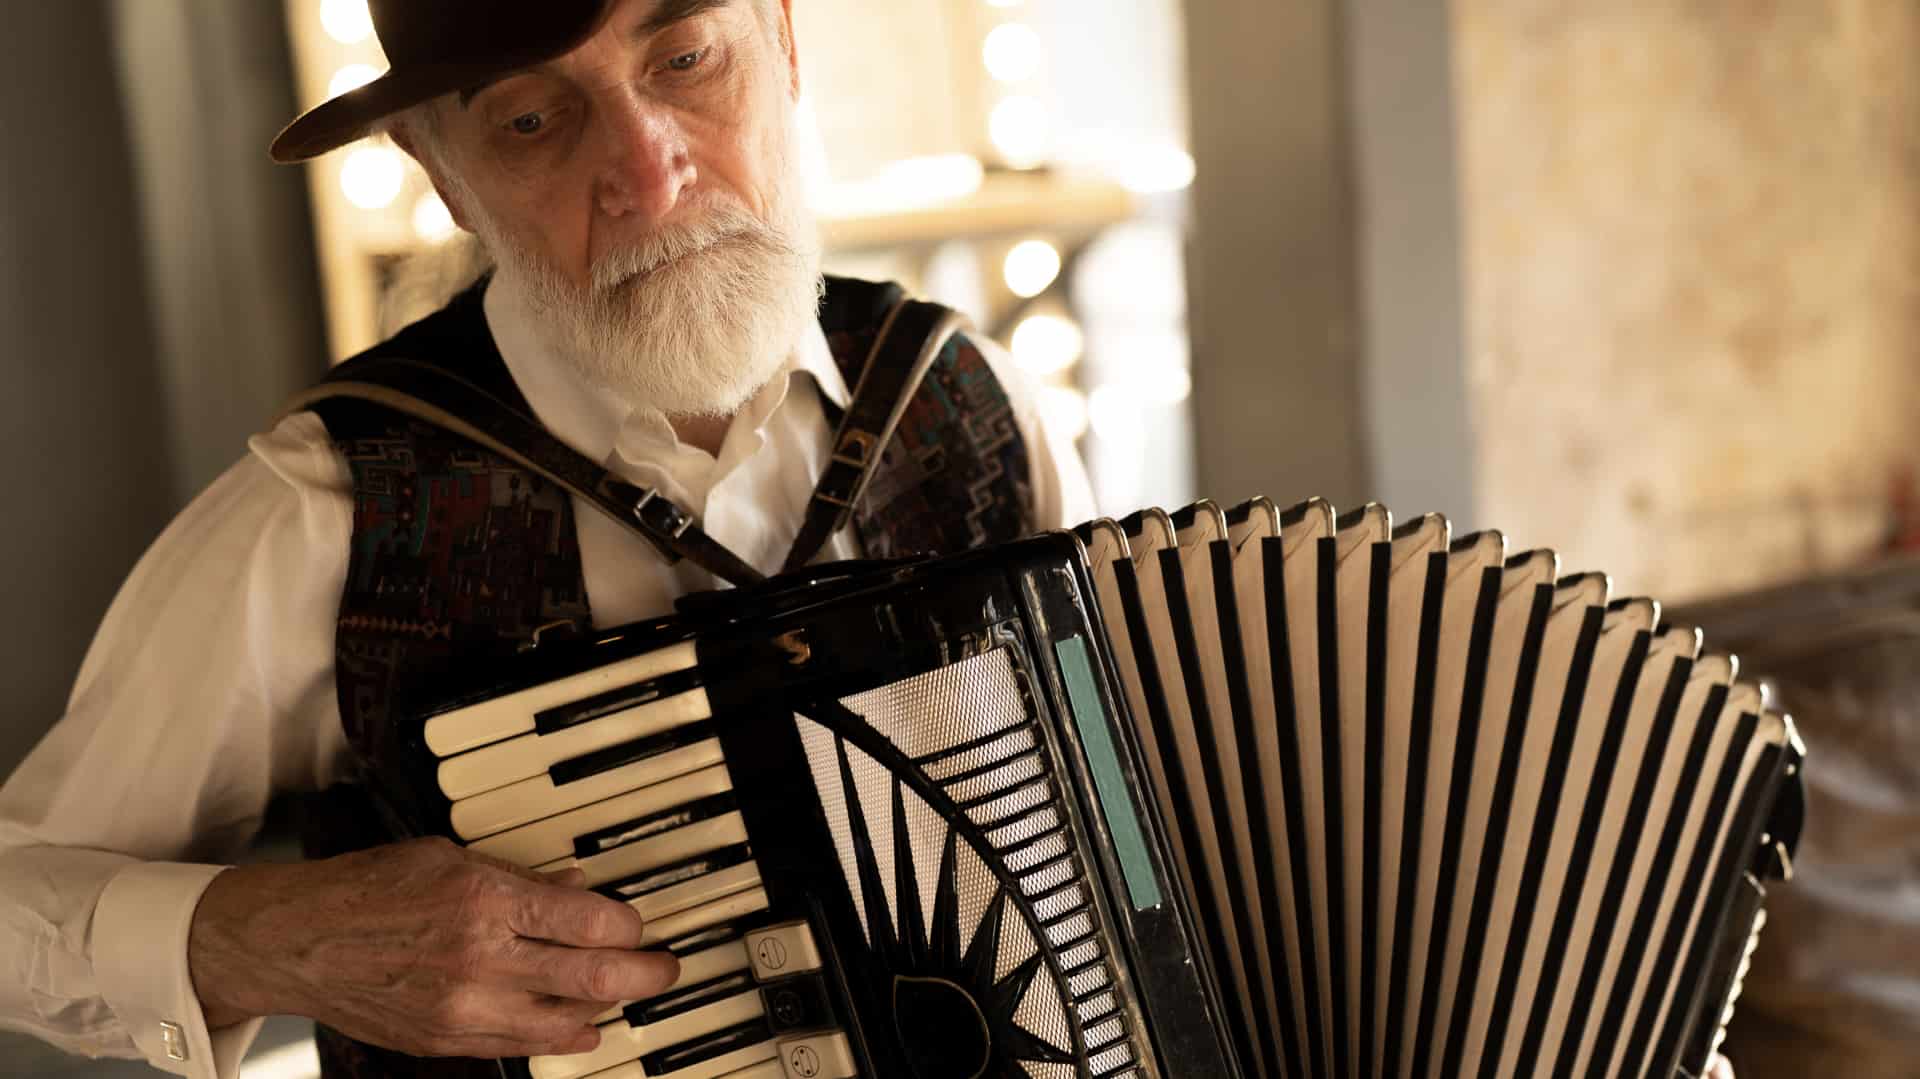 A European elderly grey-haired man in a hat plays an accordion in the living room